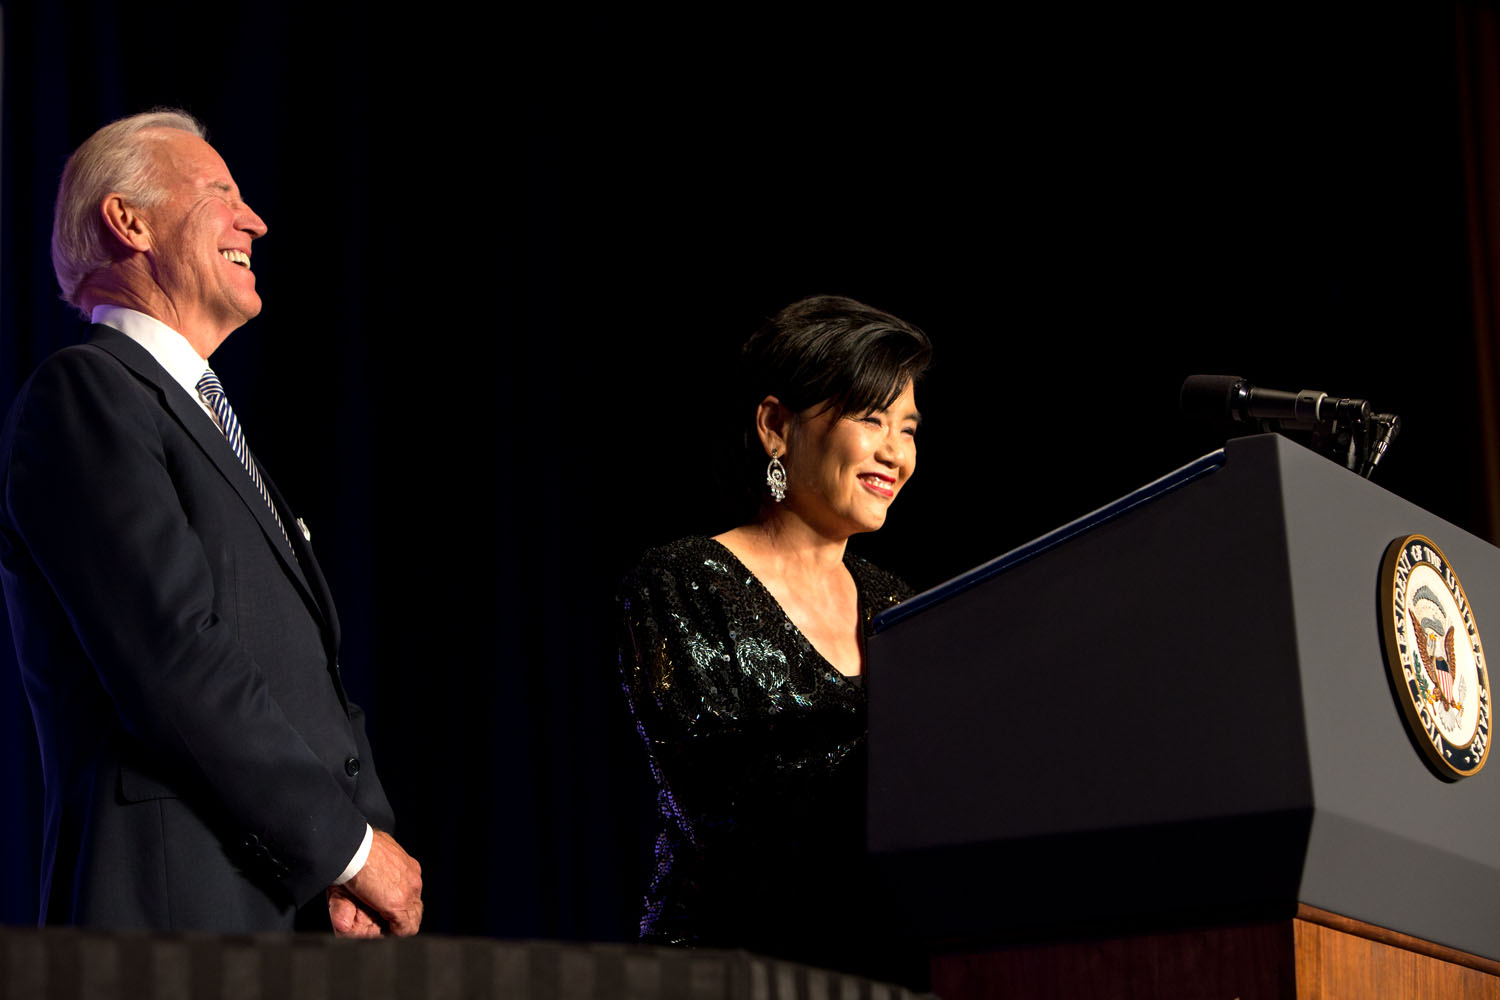 Vice President Joe Biden is introduced by representative Judy Chu, before speaking at the Asian Pacific American Institute for Congressional Studies (APAICS) Gala Awards Dinner, at the Washington Hilton in Washington, DC.